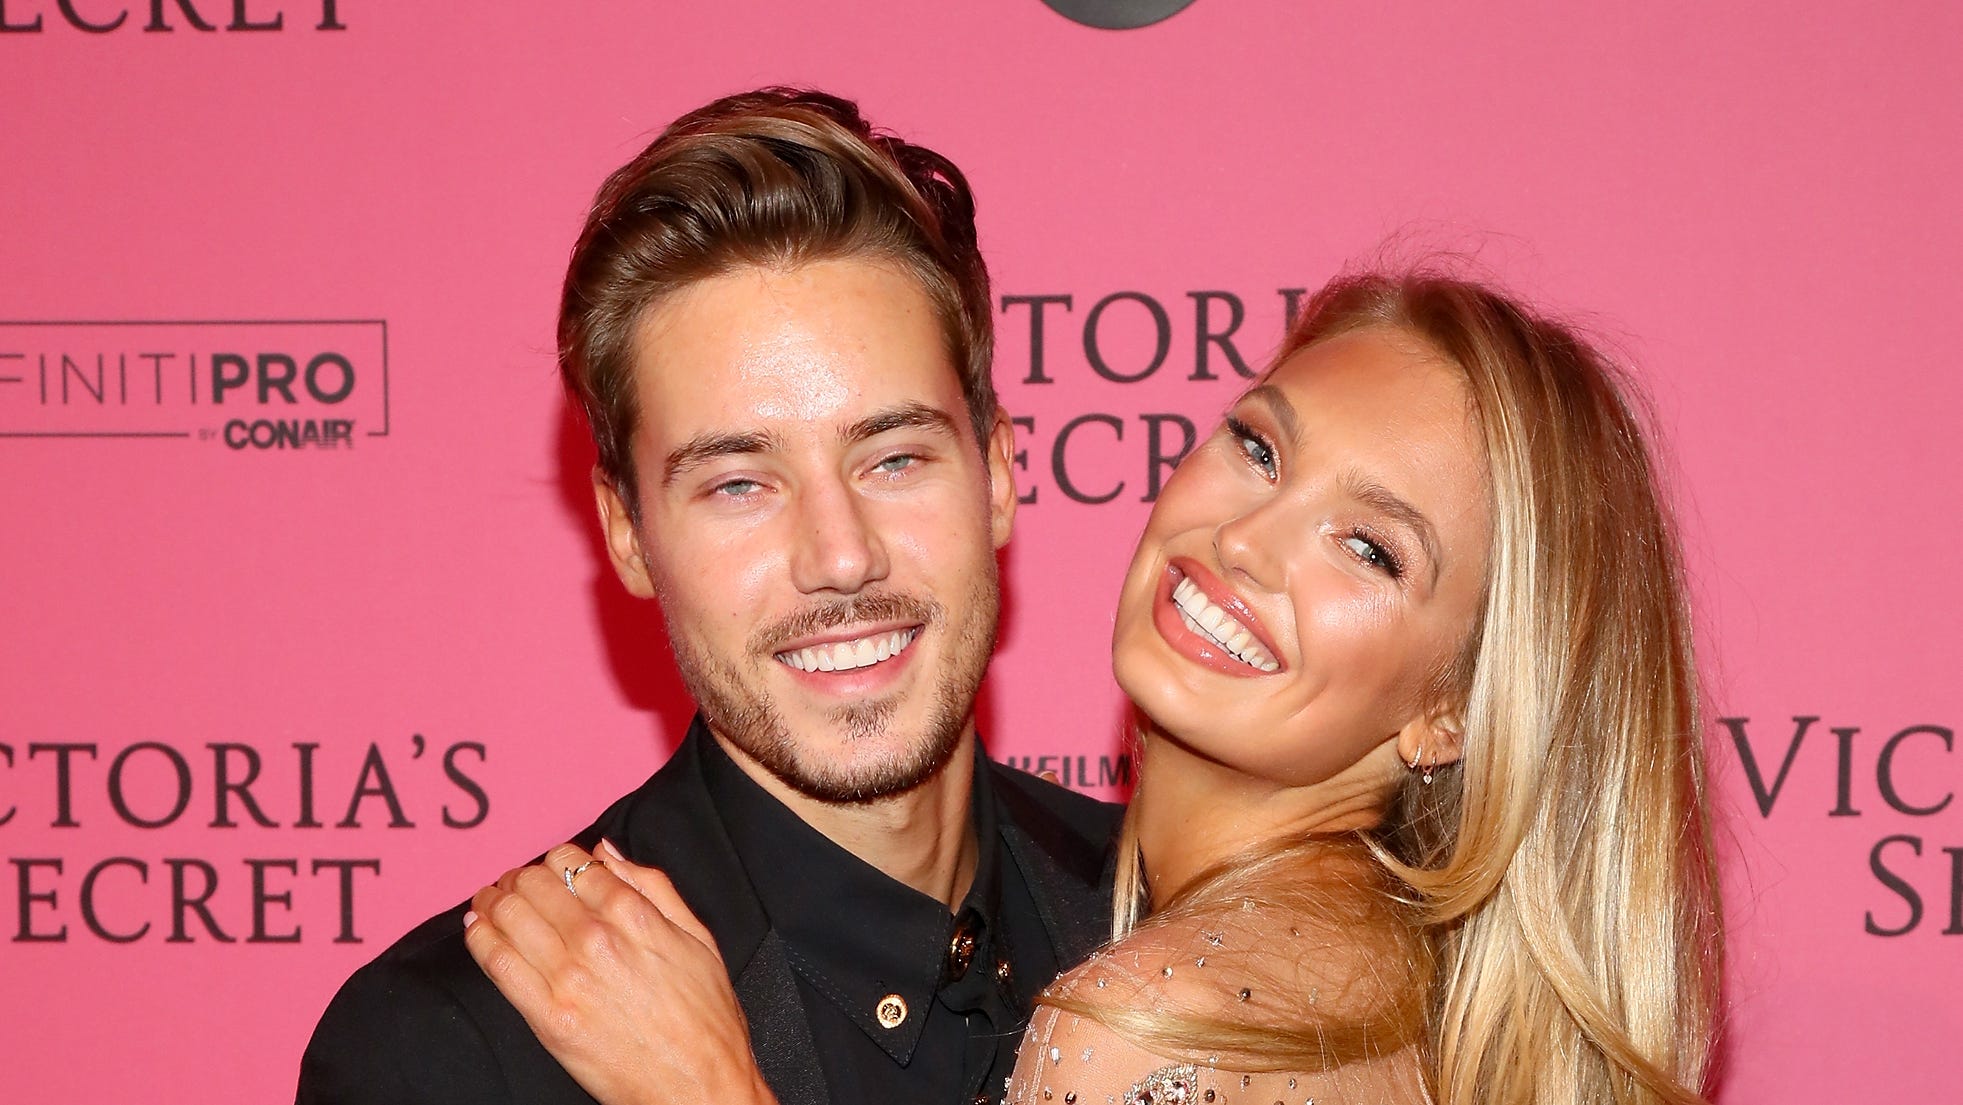 Victoria's Secret model Romee Strijd is pregnant after fertility struggle: 'Cannot believe I'm saying this' - USA TODAY